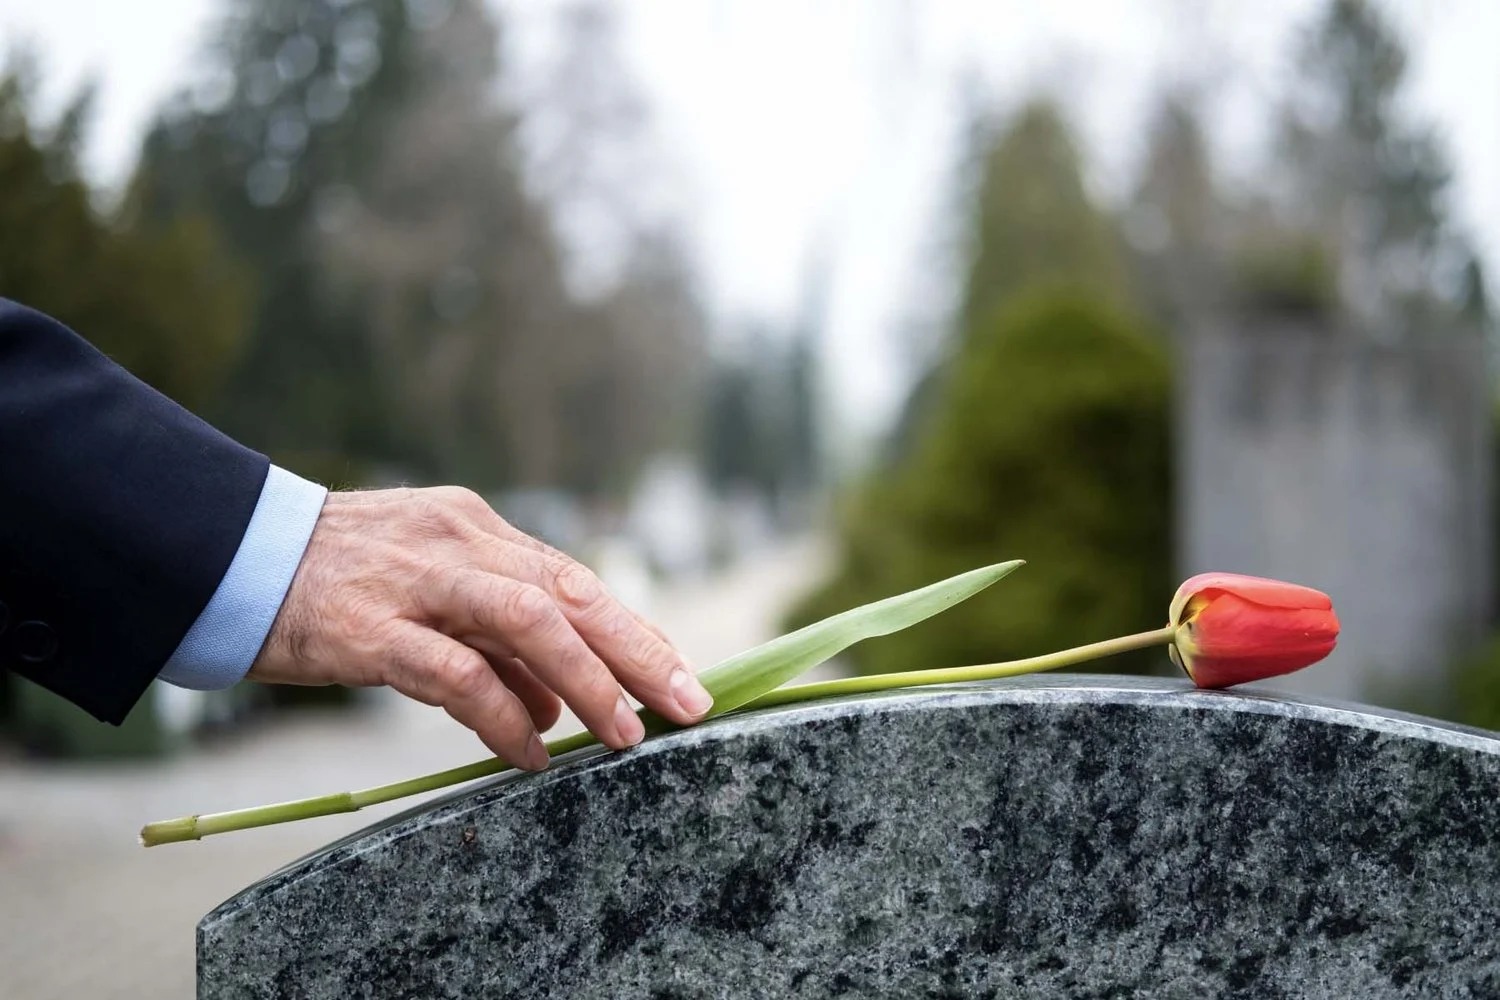 How To Pay For Funeral Expenses Without Life Insurance